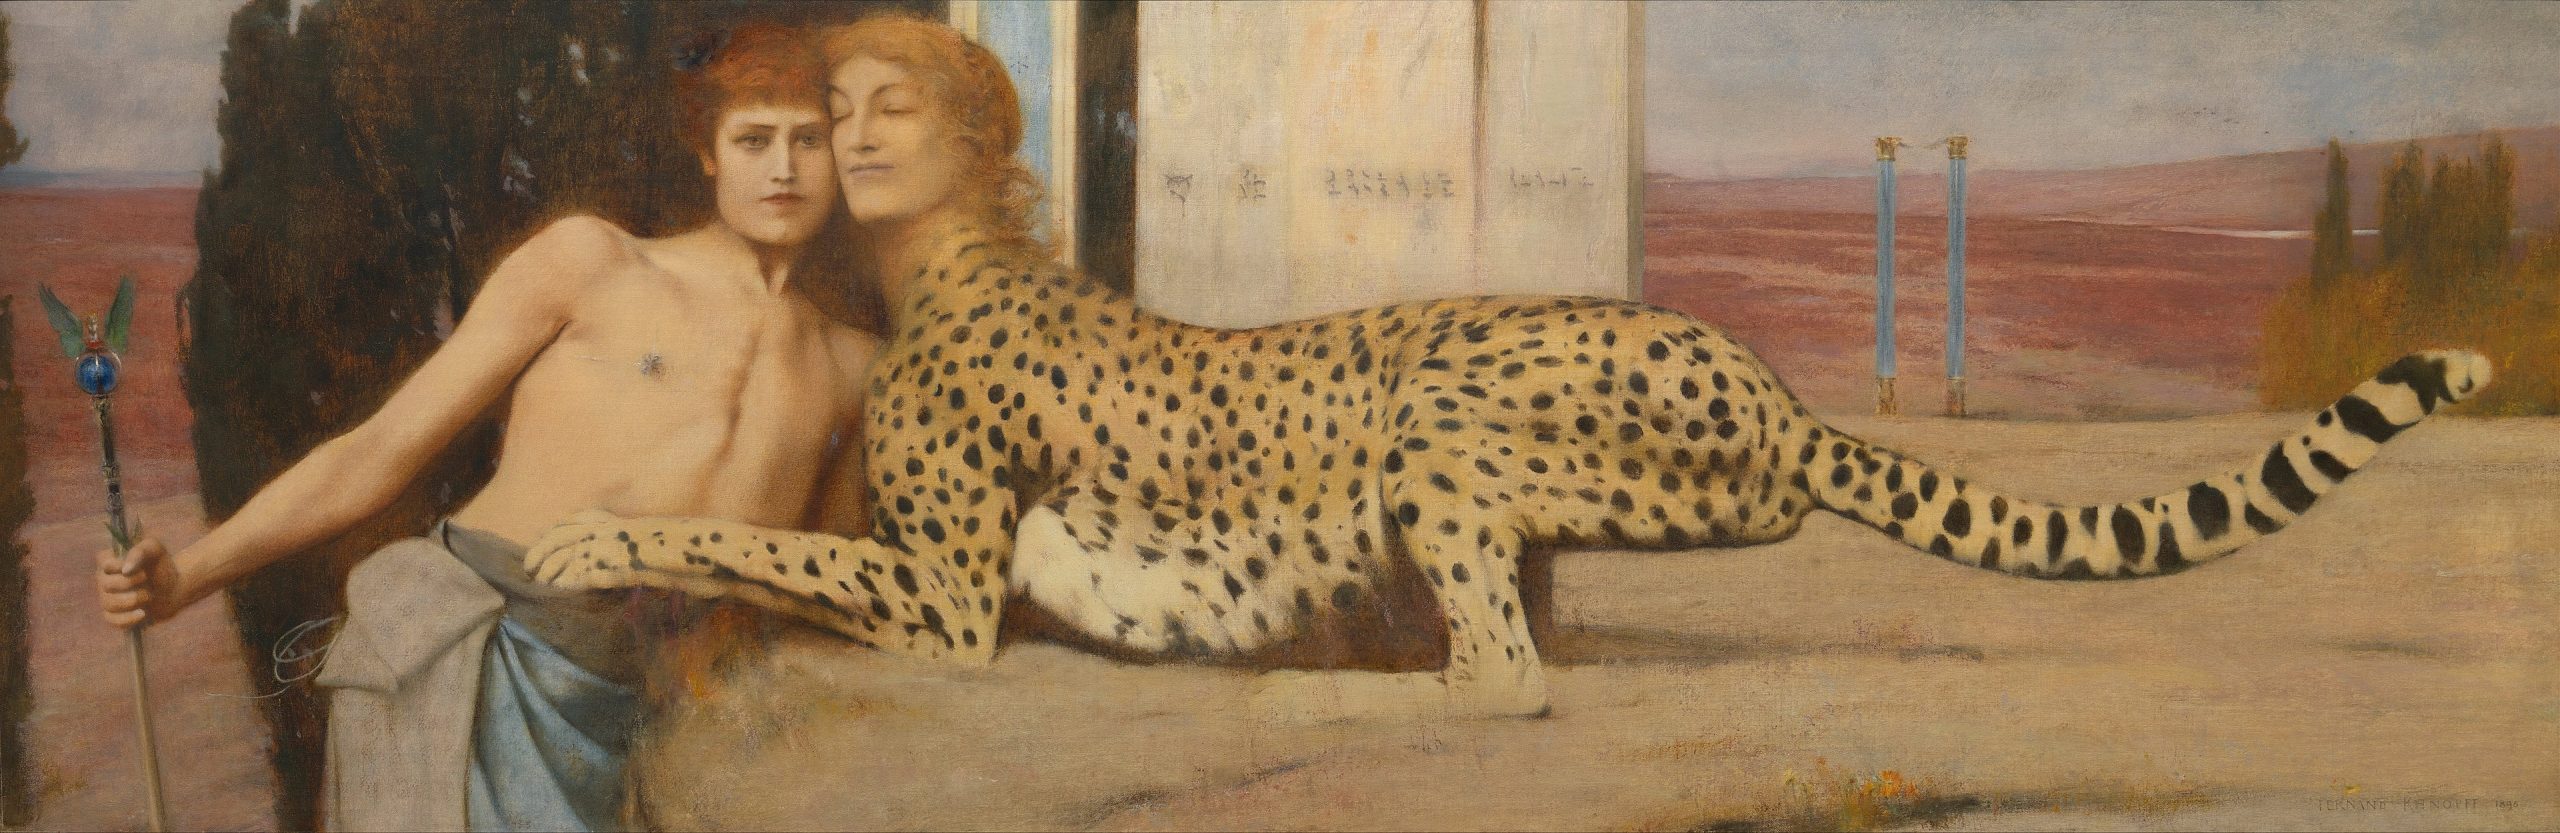 A woman with the body of a cheetah holds her head close to that of a man holding a sceptre